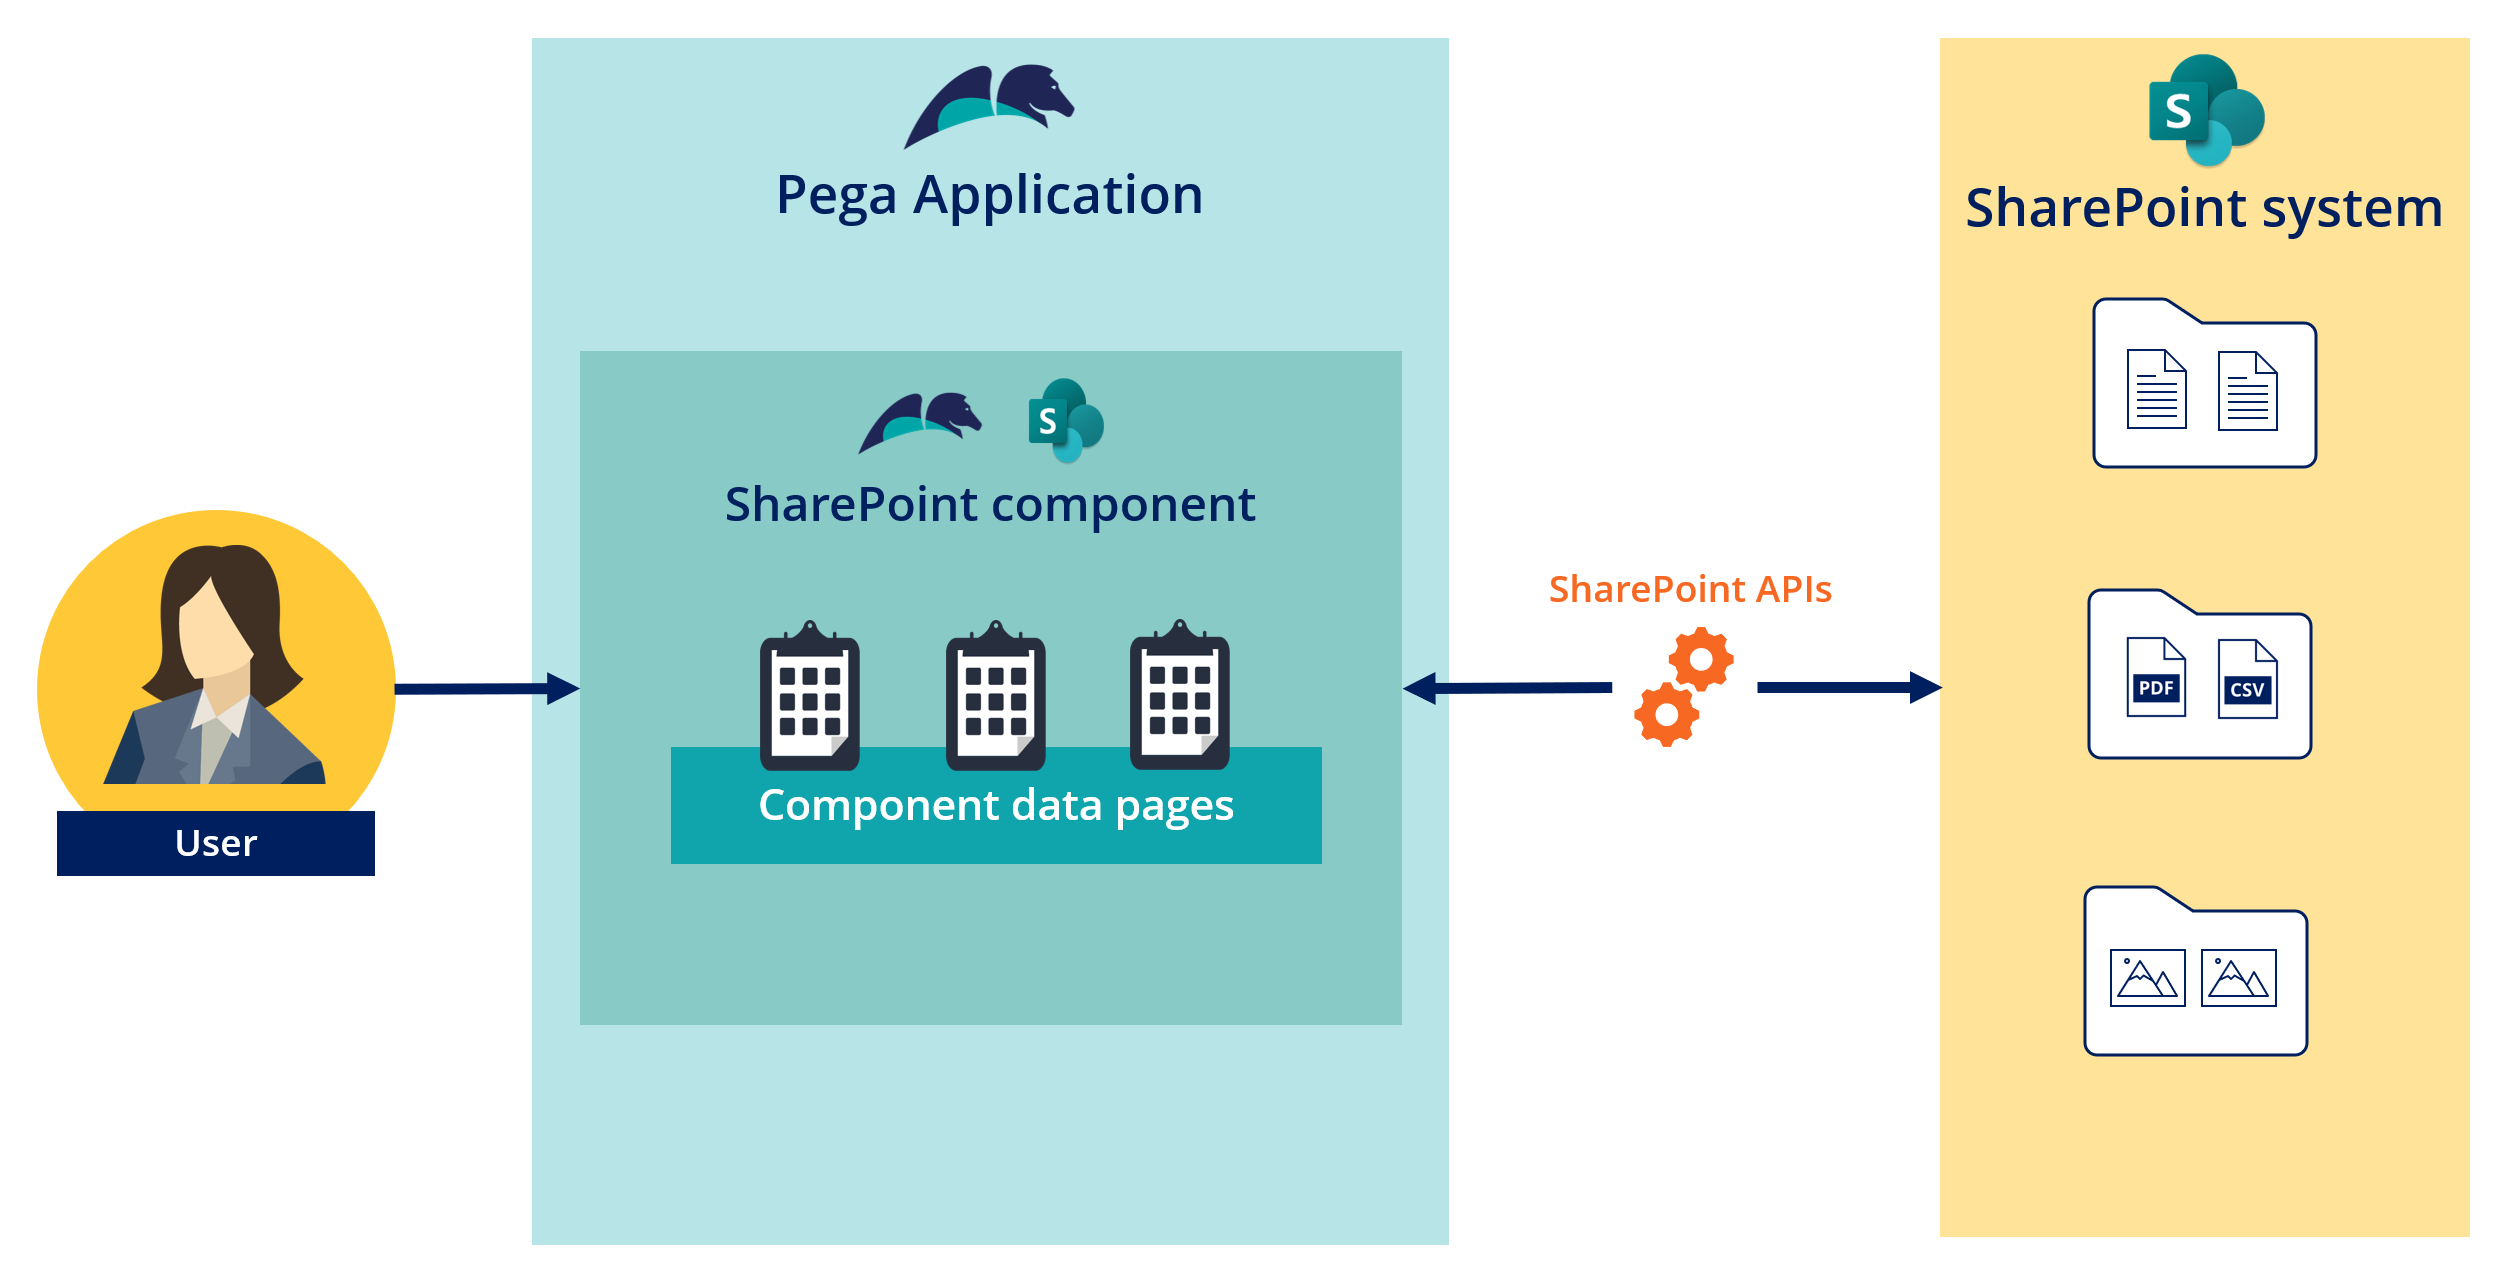 Diagram that shows how users can communicate with an external SharePoint site by using the component data pages.